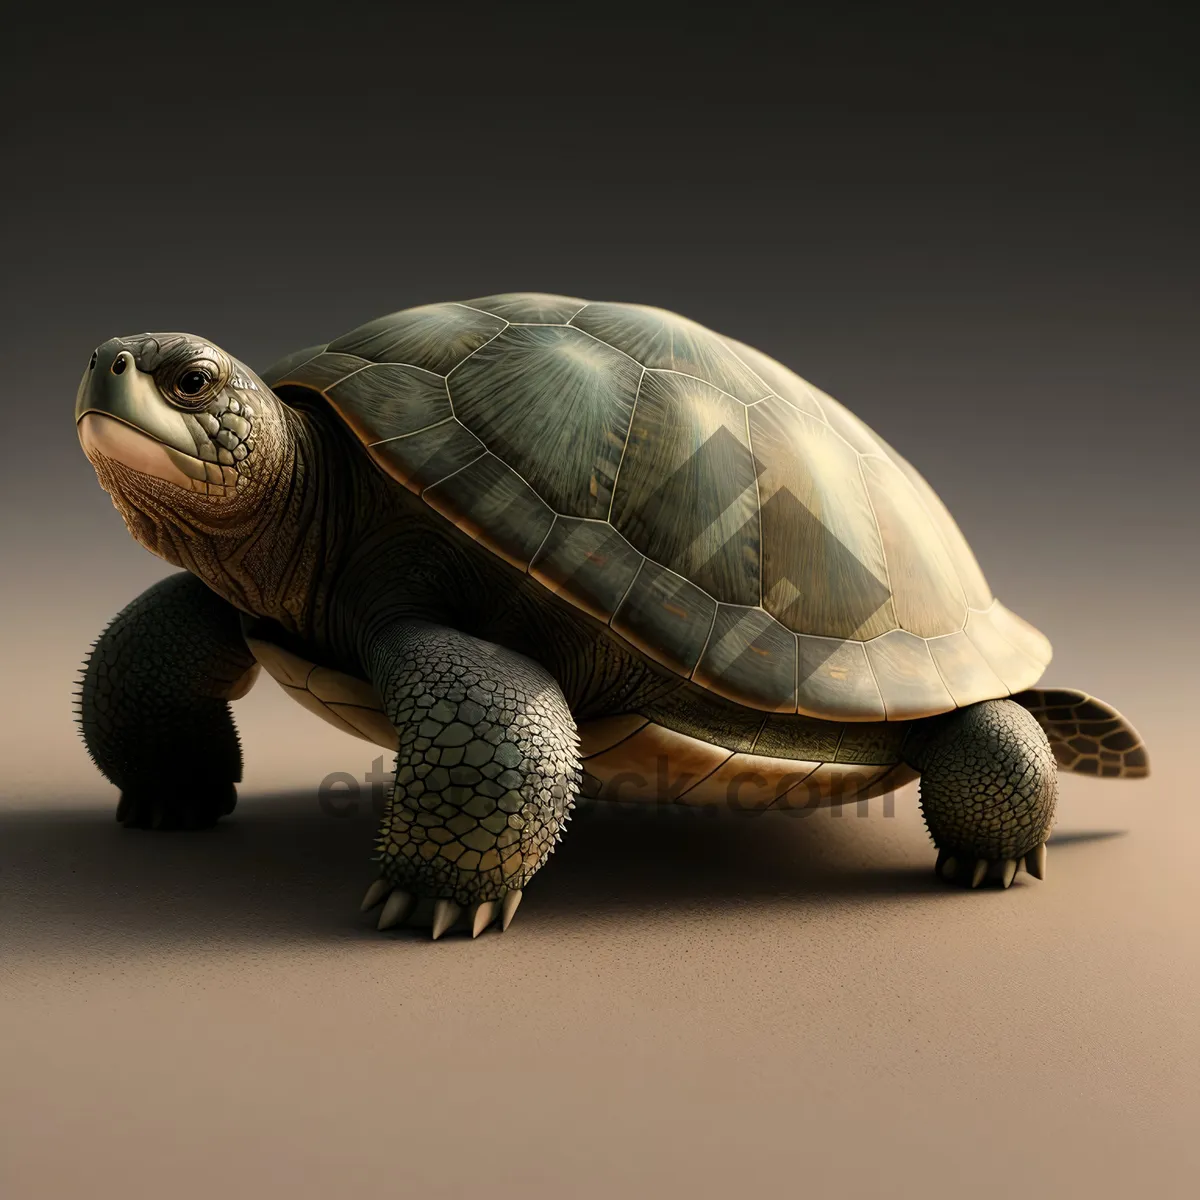 Picture of Mud Turtle: A Cute, Slow-Moving Reptile in Its Protective Shell